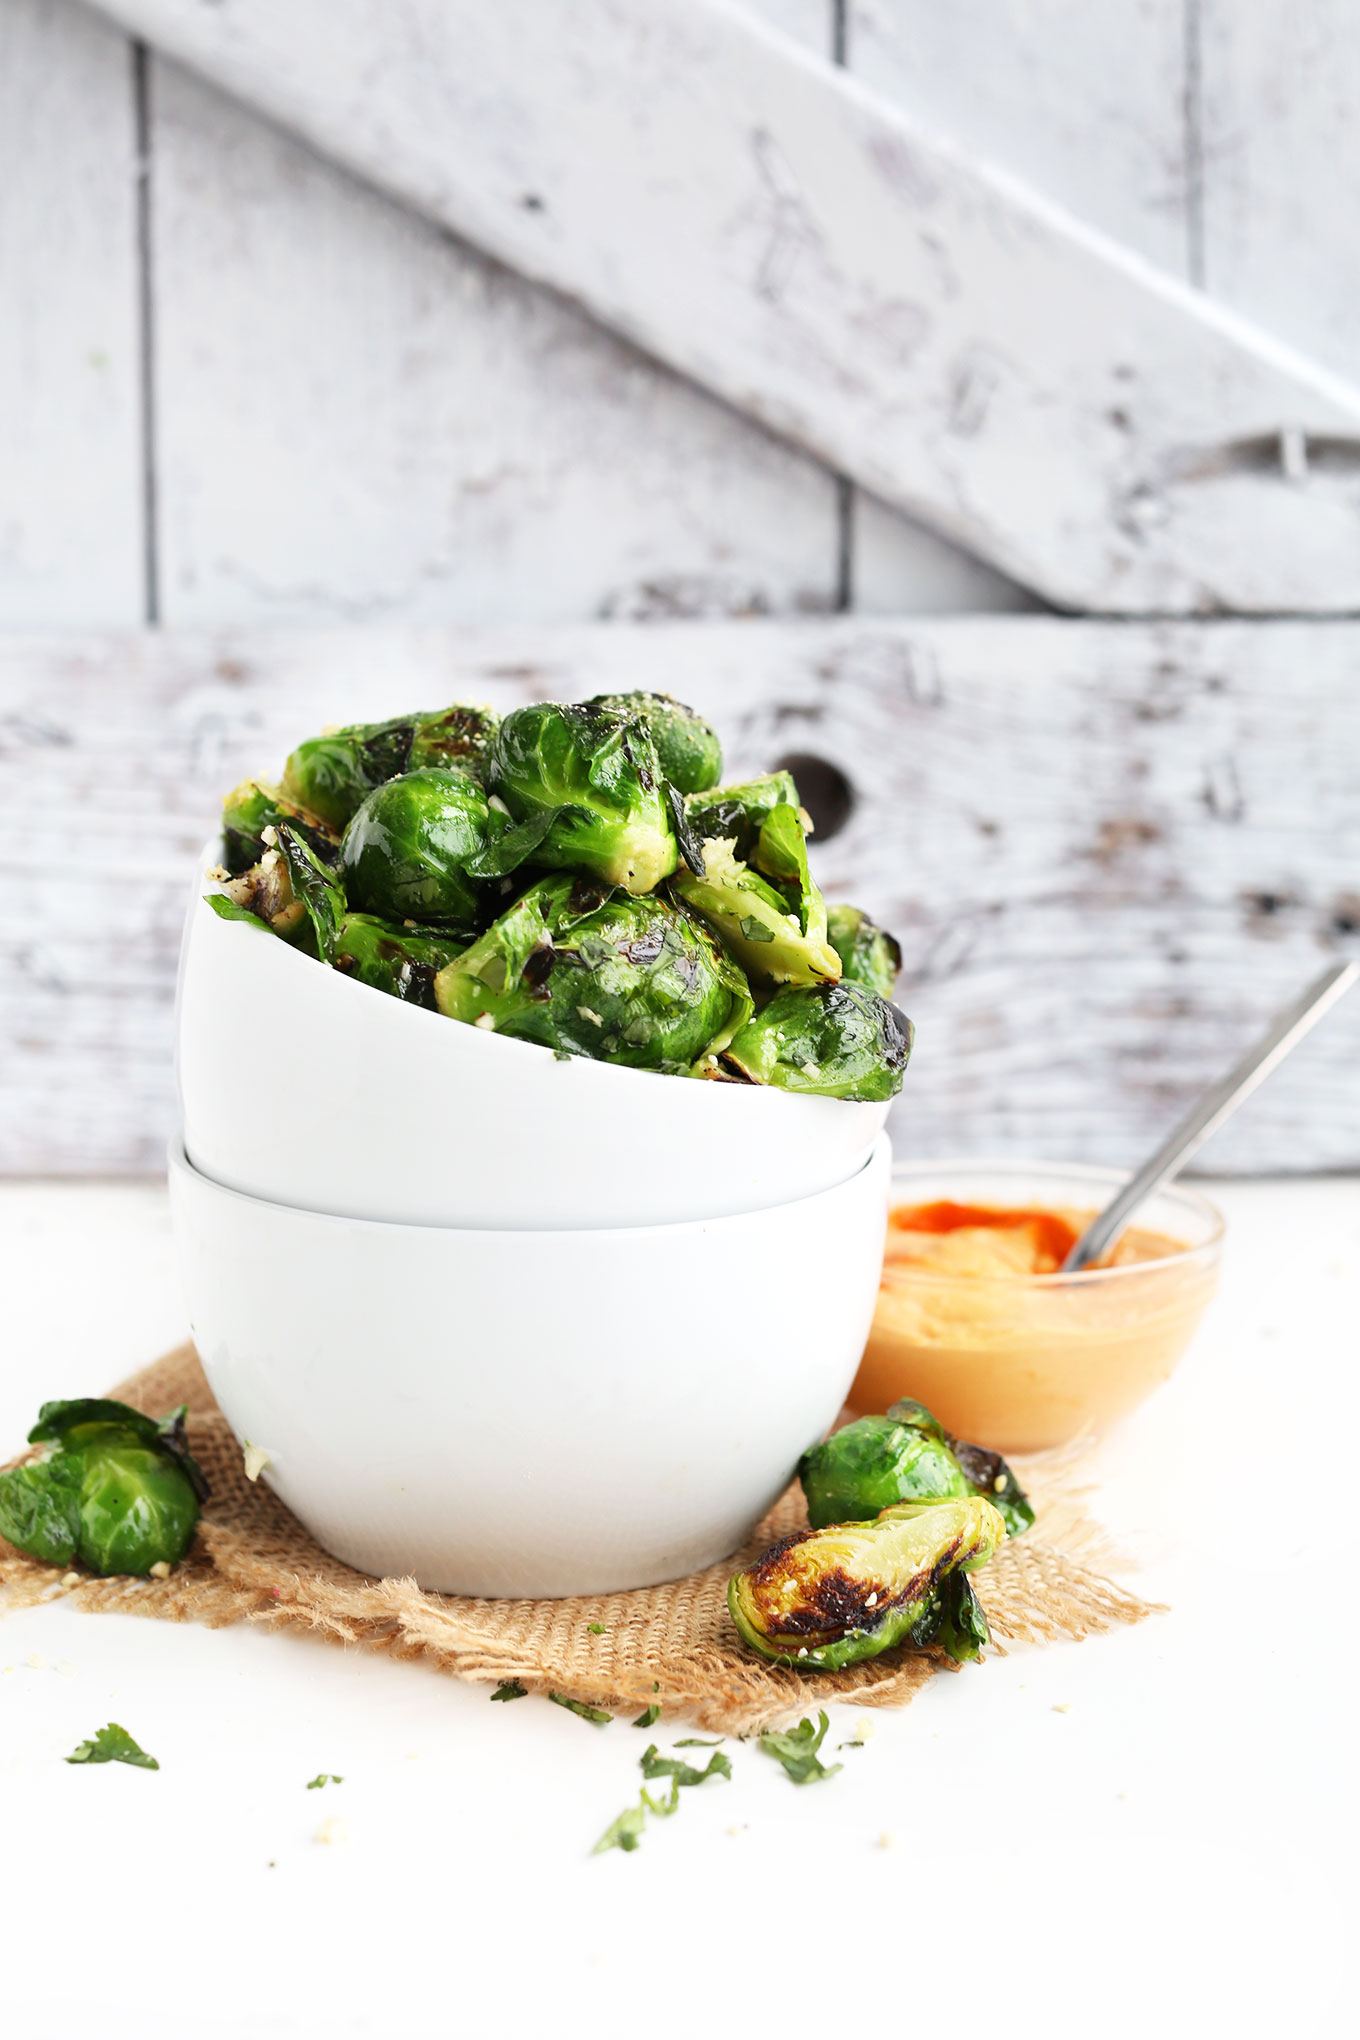 Crispy Brussels Sprouts and creamy Sriracha Aioli for a gluten-free vegan appetizer